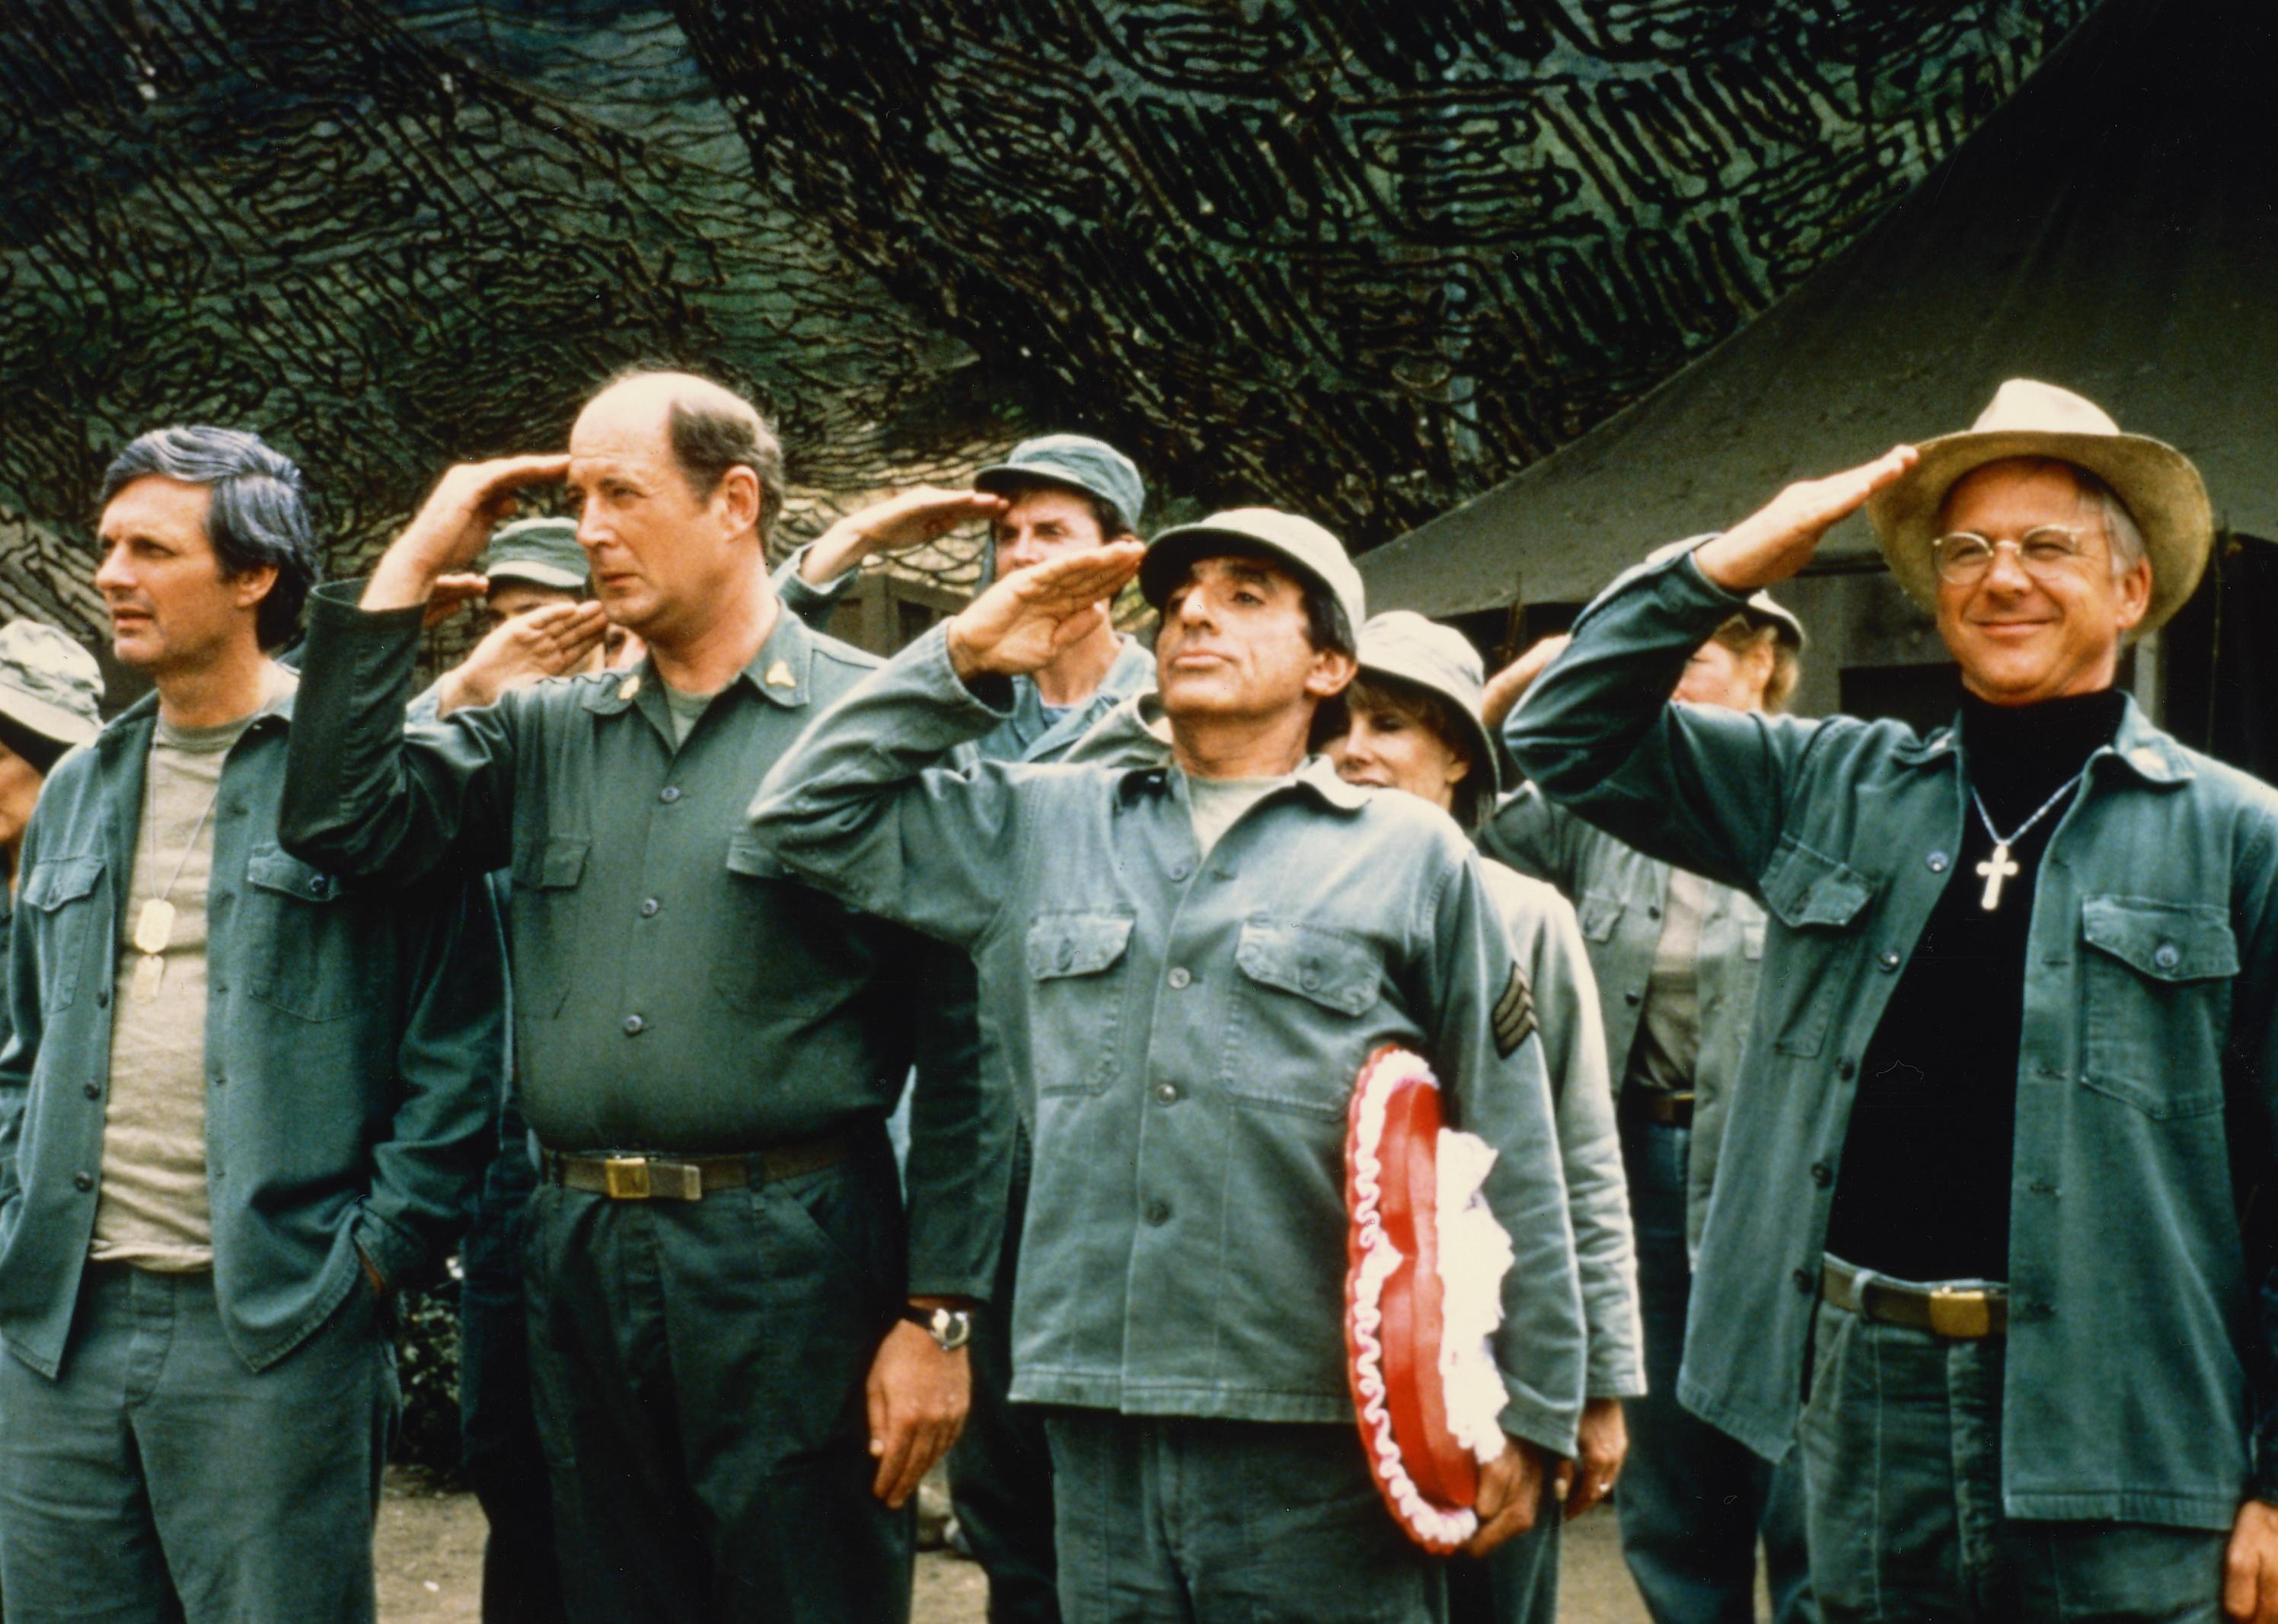 Alan Alda and the cast from M.A.S.H. salute in army greens.